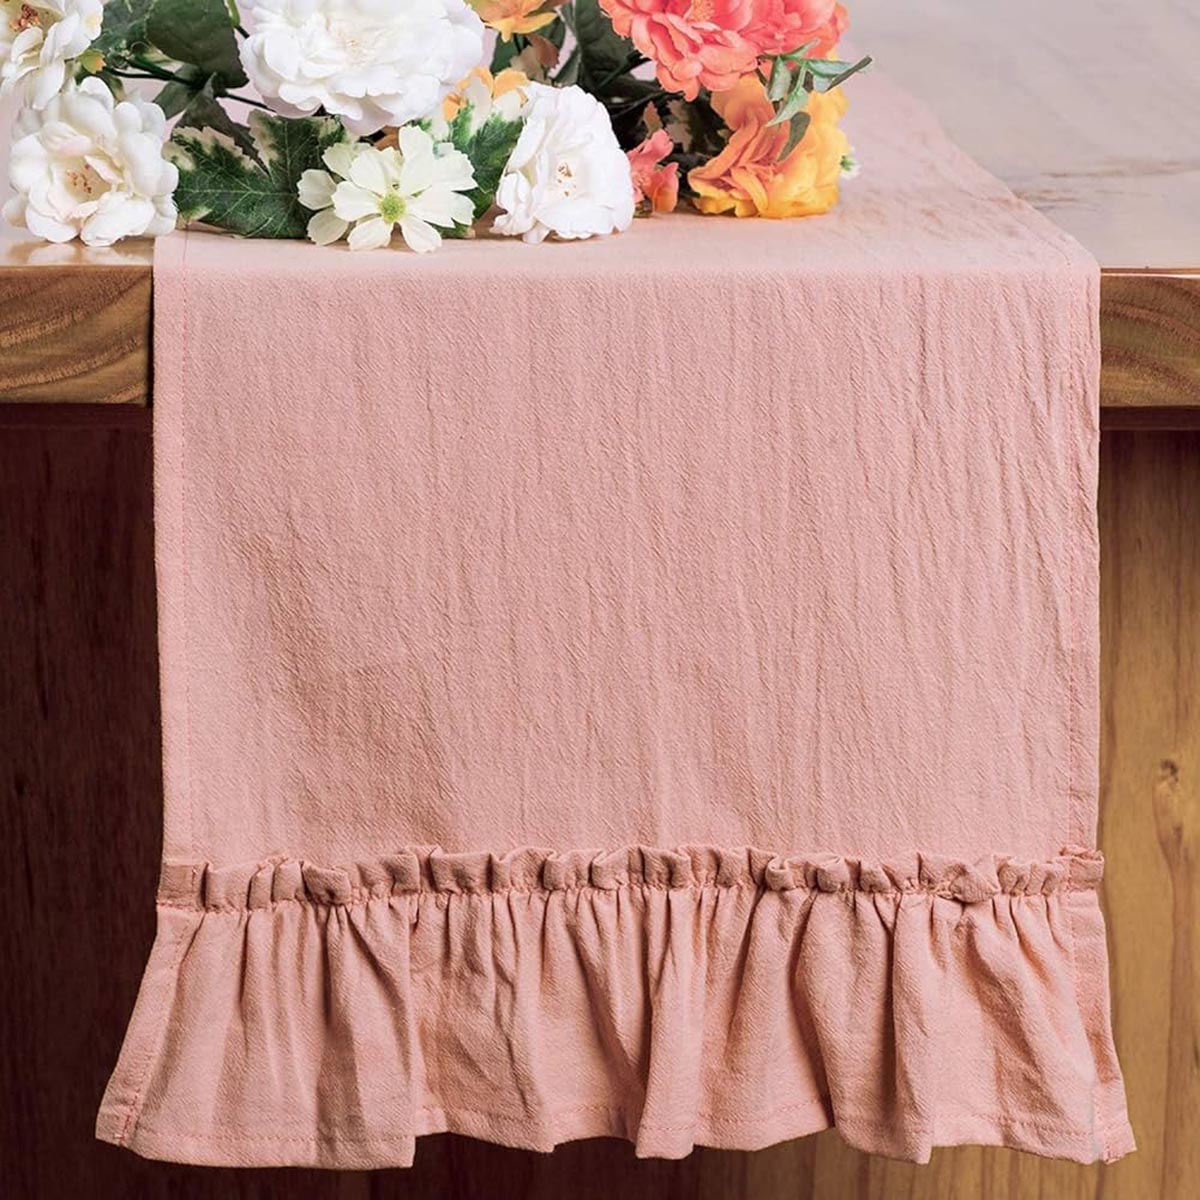 How To Ruche Table Runners